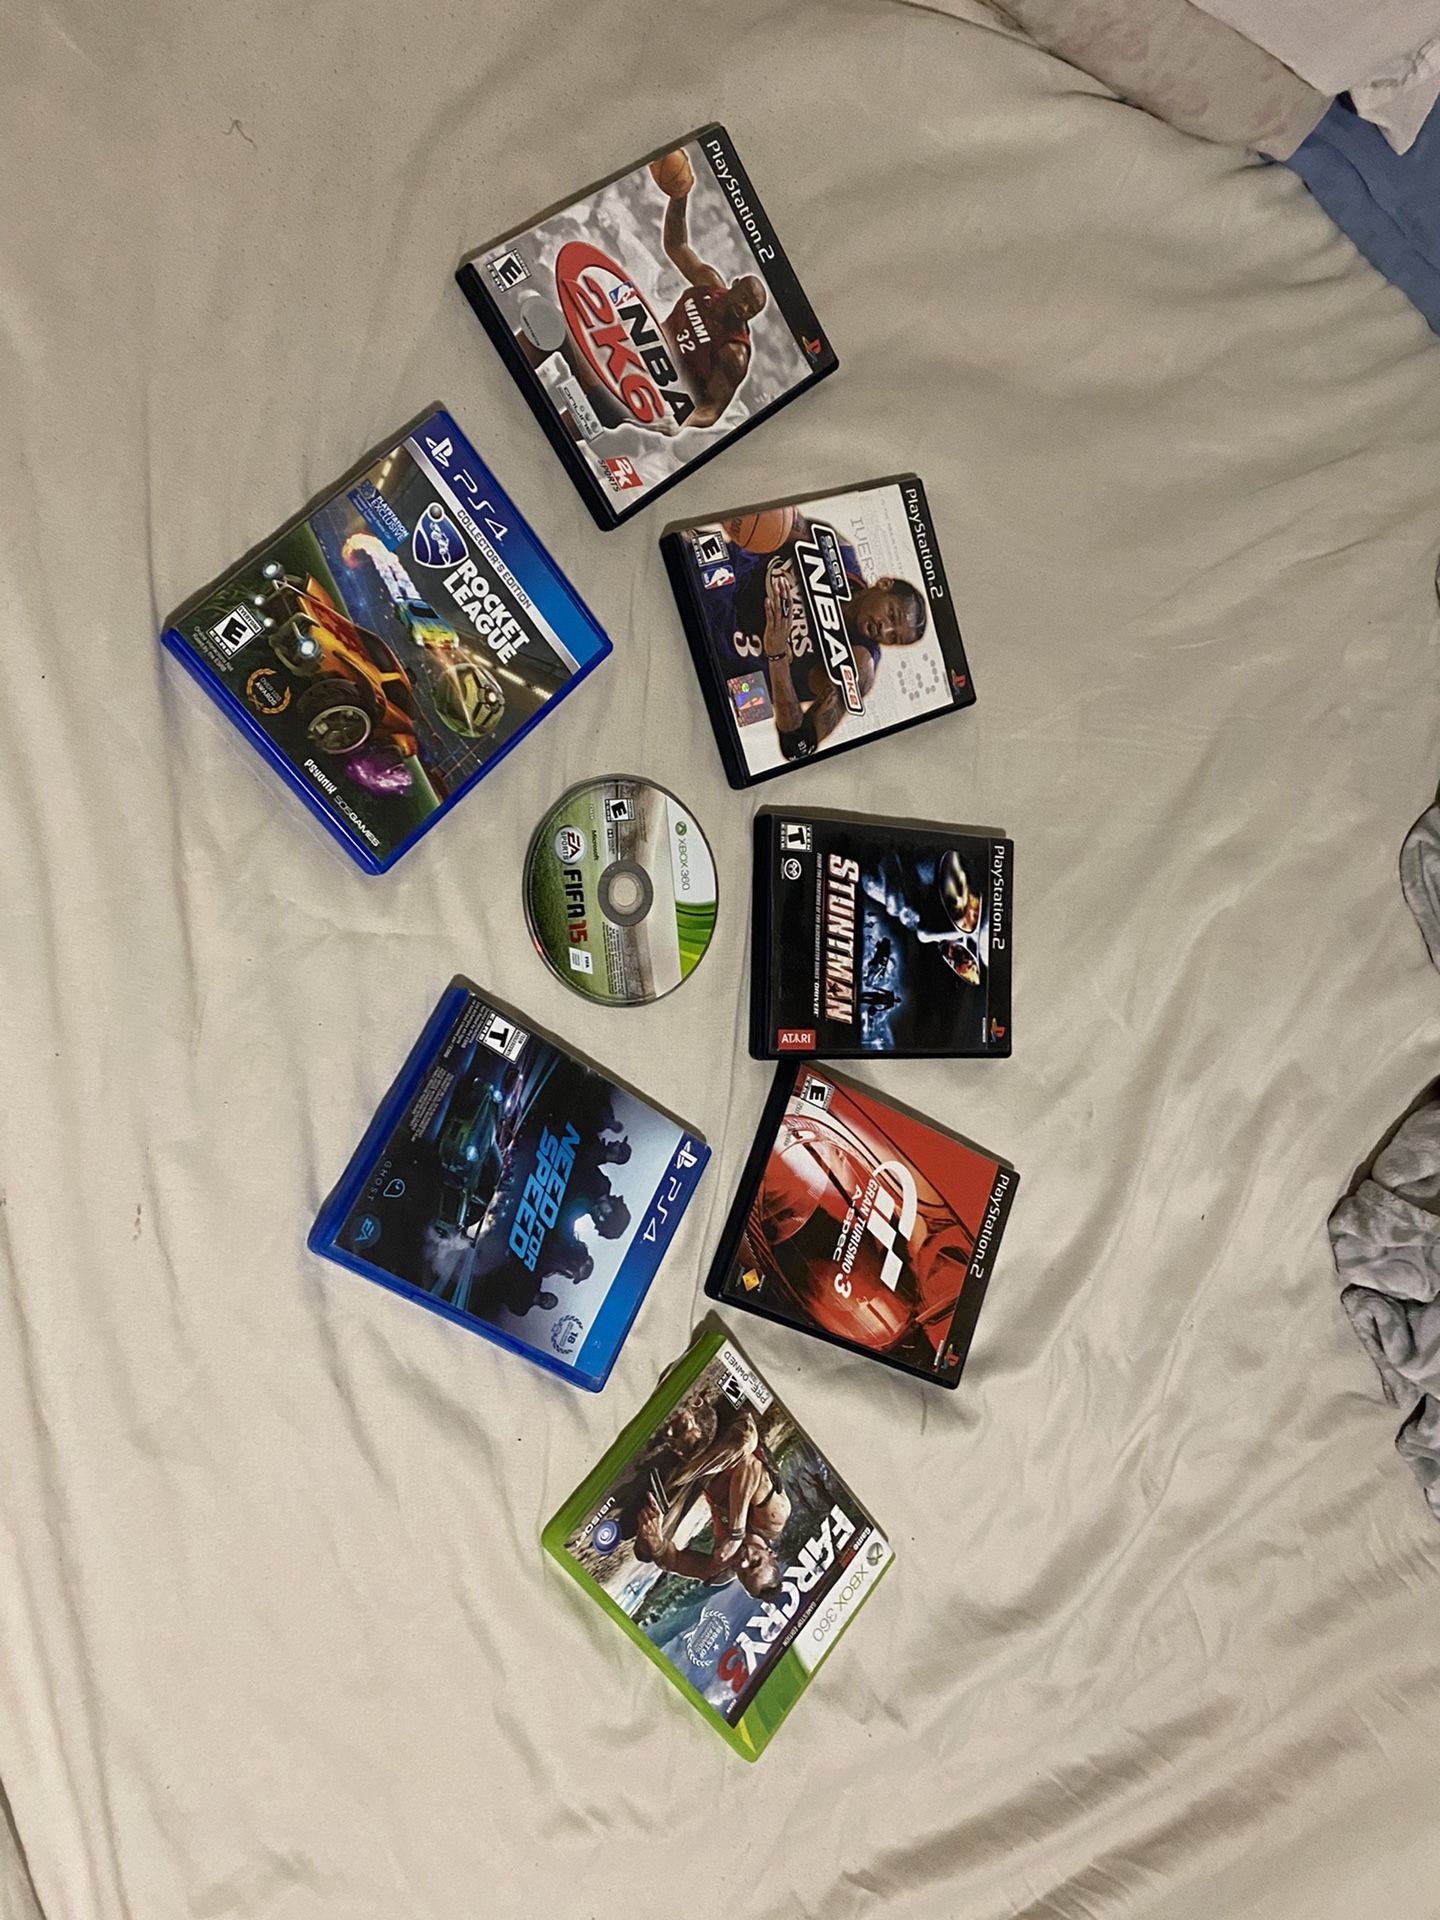 All these GAMES PS2, PS4 and XBOX 360 for